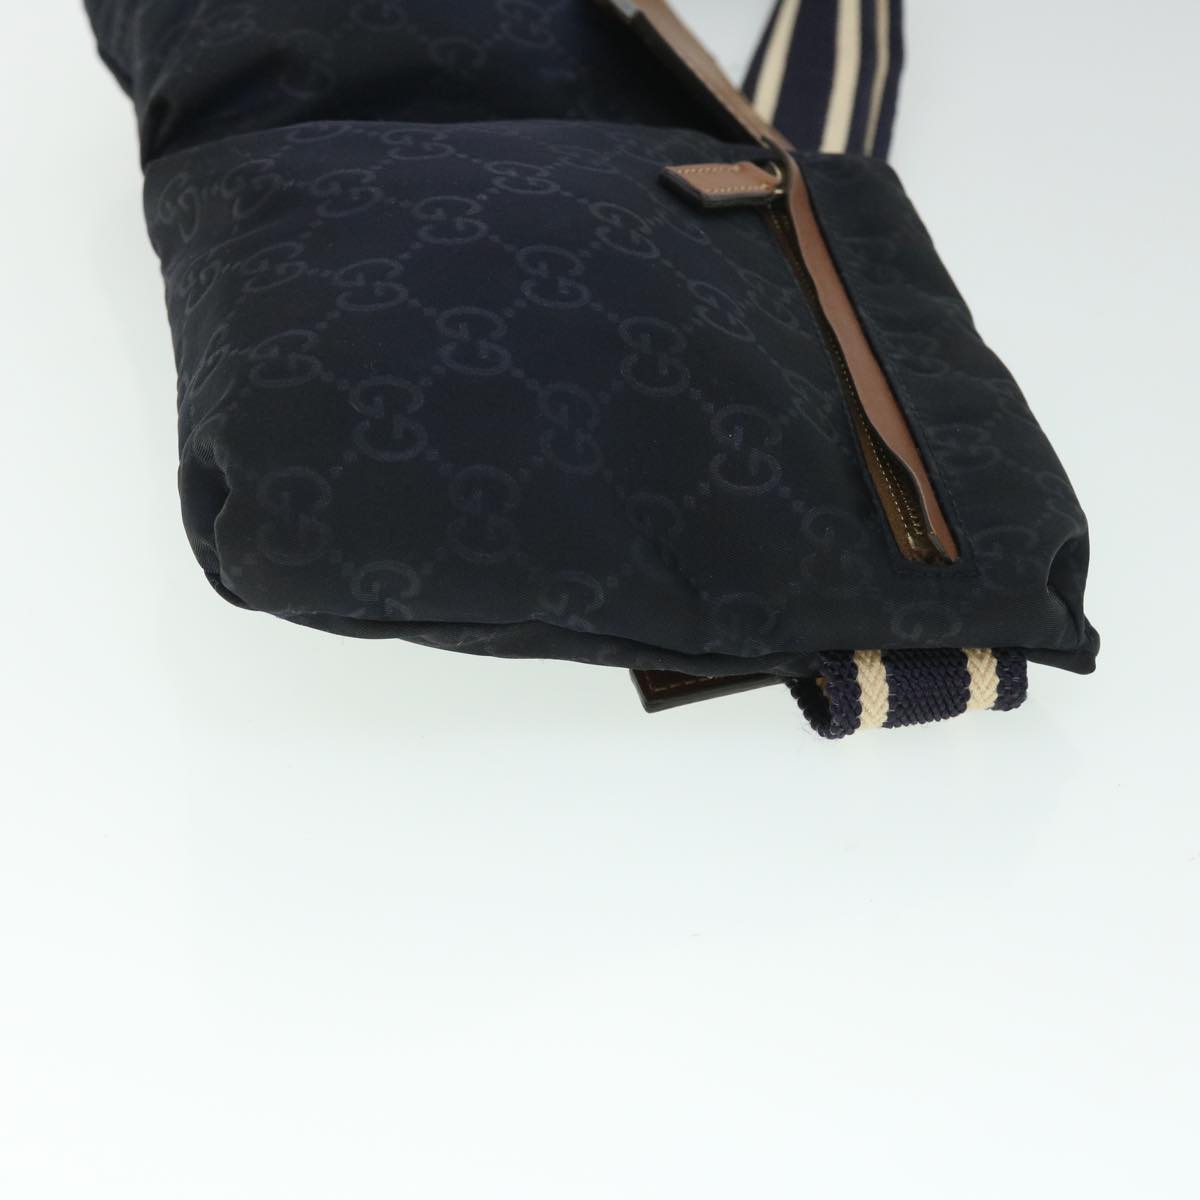 GUCCI GG Canvas Sherry Line Waist bag Navy White 28566 Auth 53375